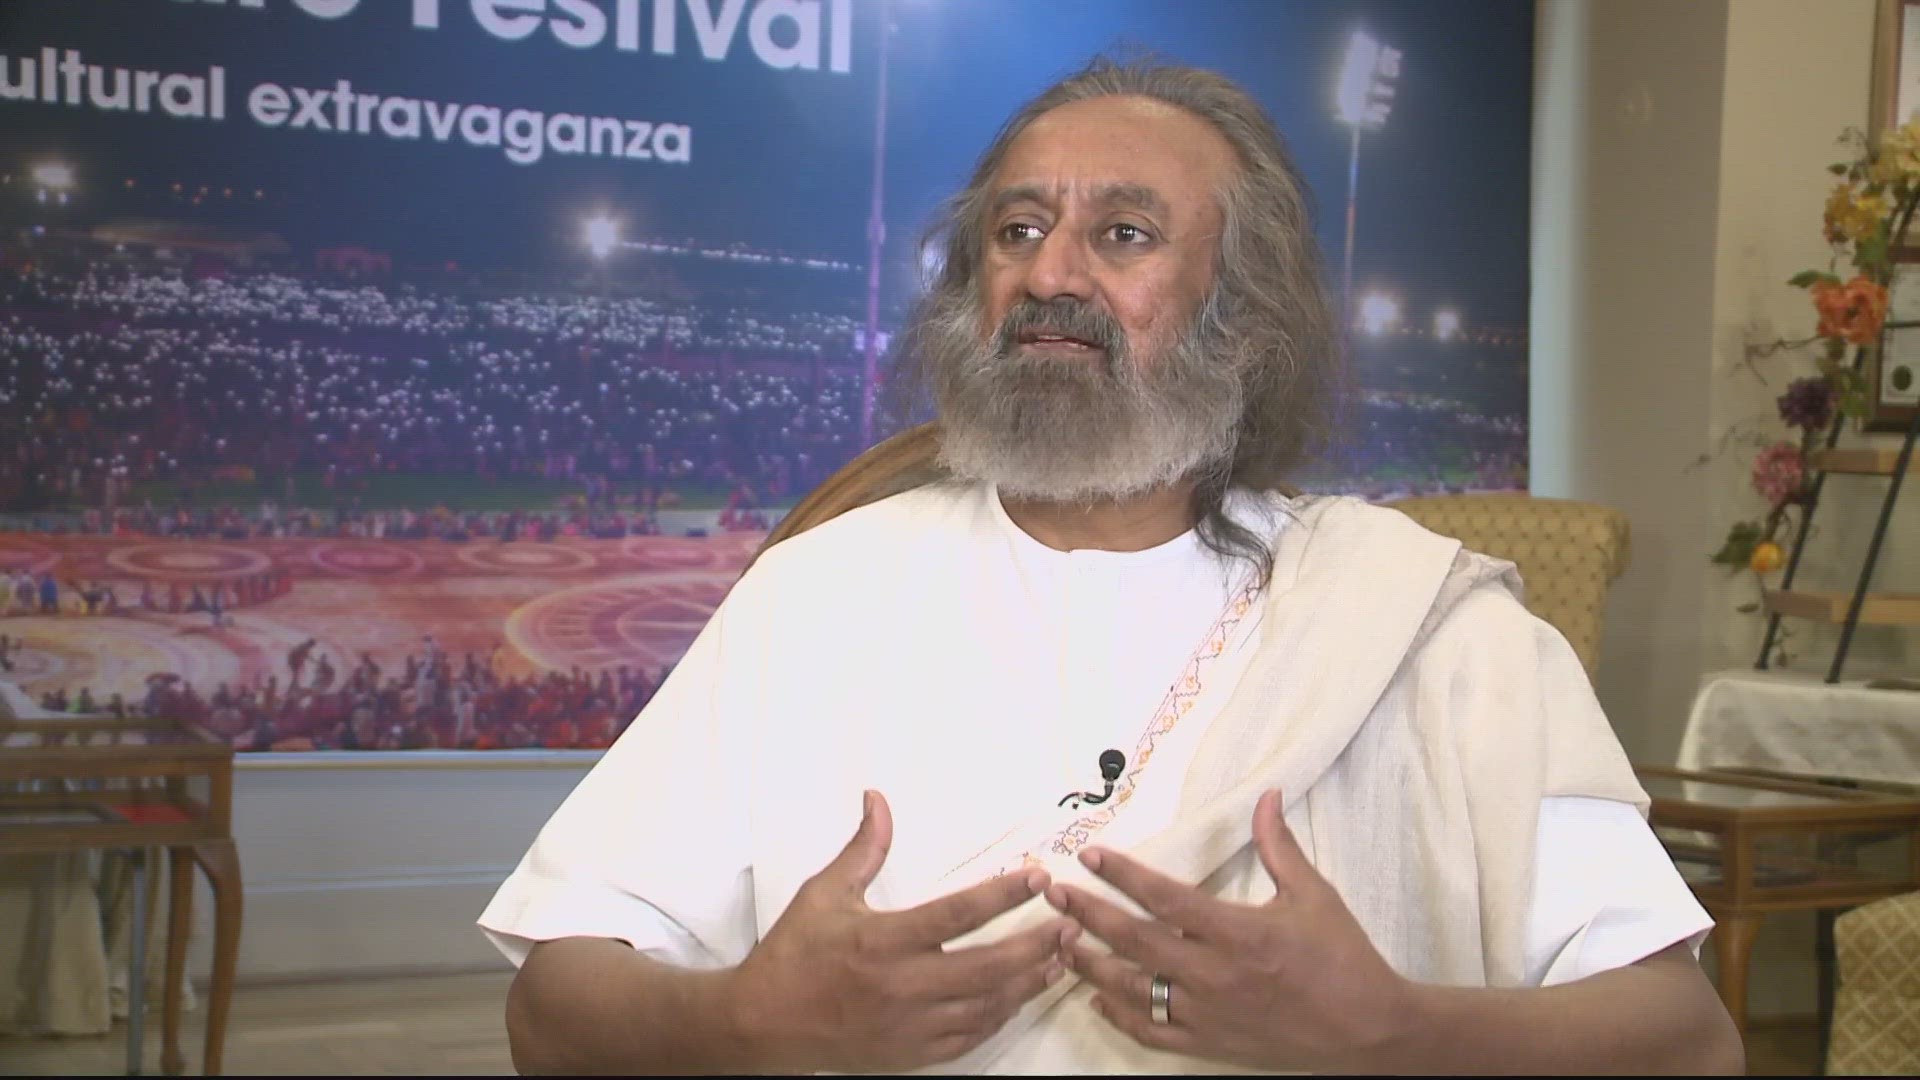 Festival's founder, Gurudev Sri Sri Ravi Shankar, sat down exclusively with WUSA9 ahead of event's arrival to D.C.